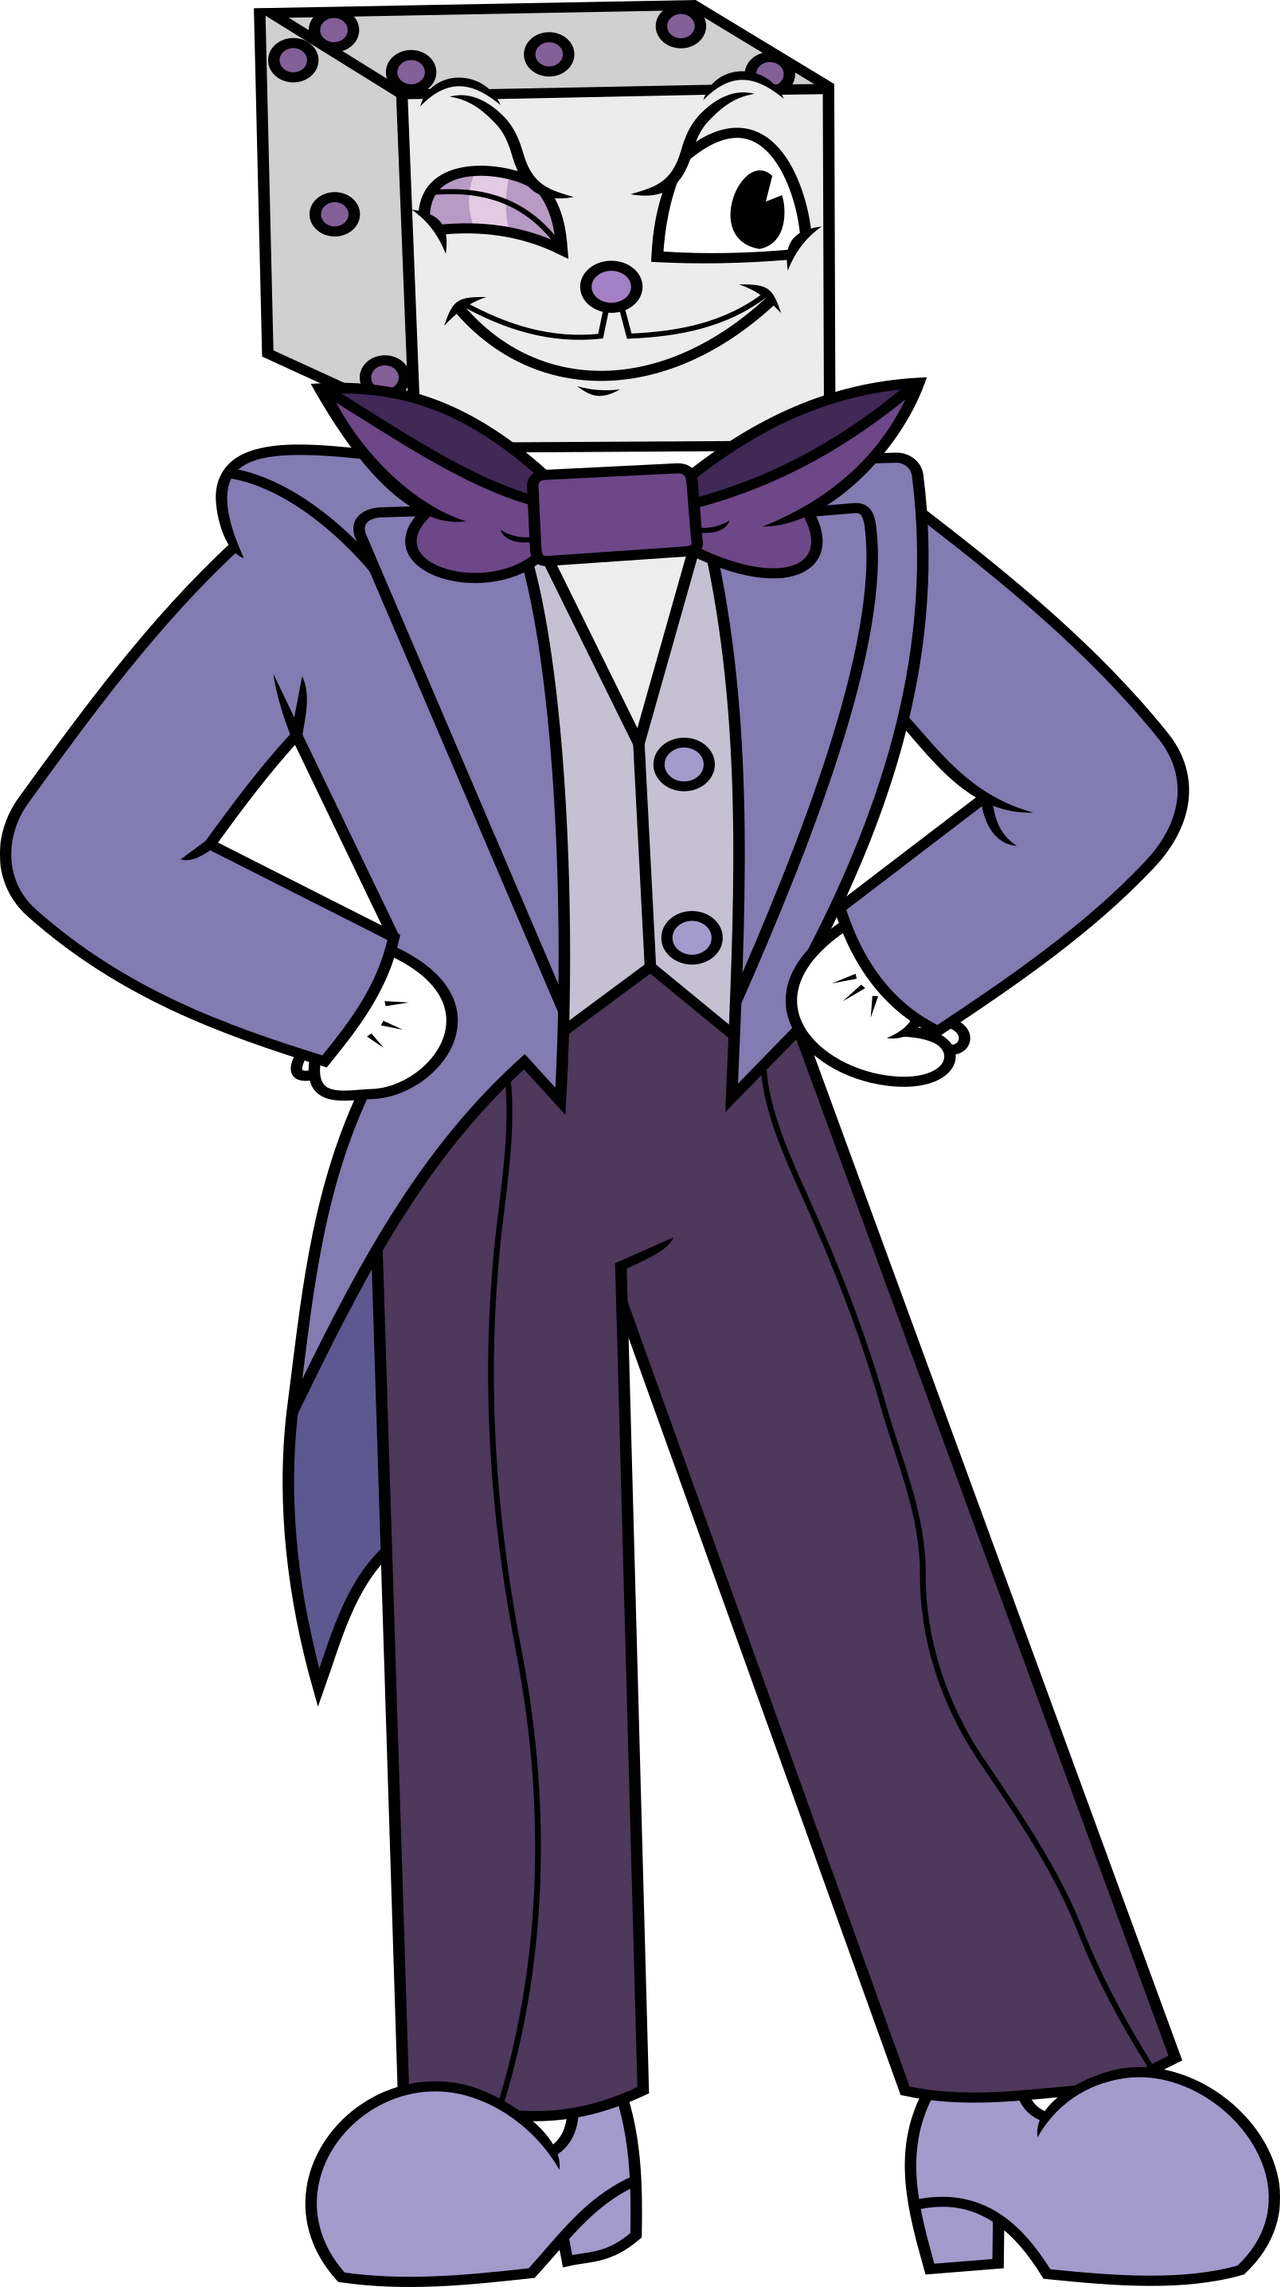 King Dice By Allusionlunatic On Deviantart